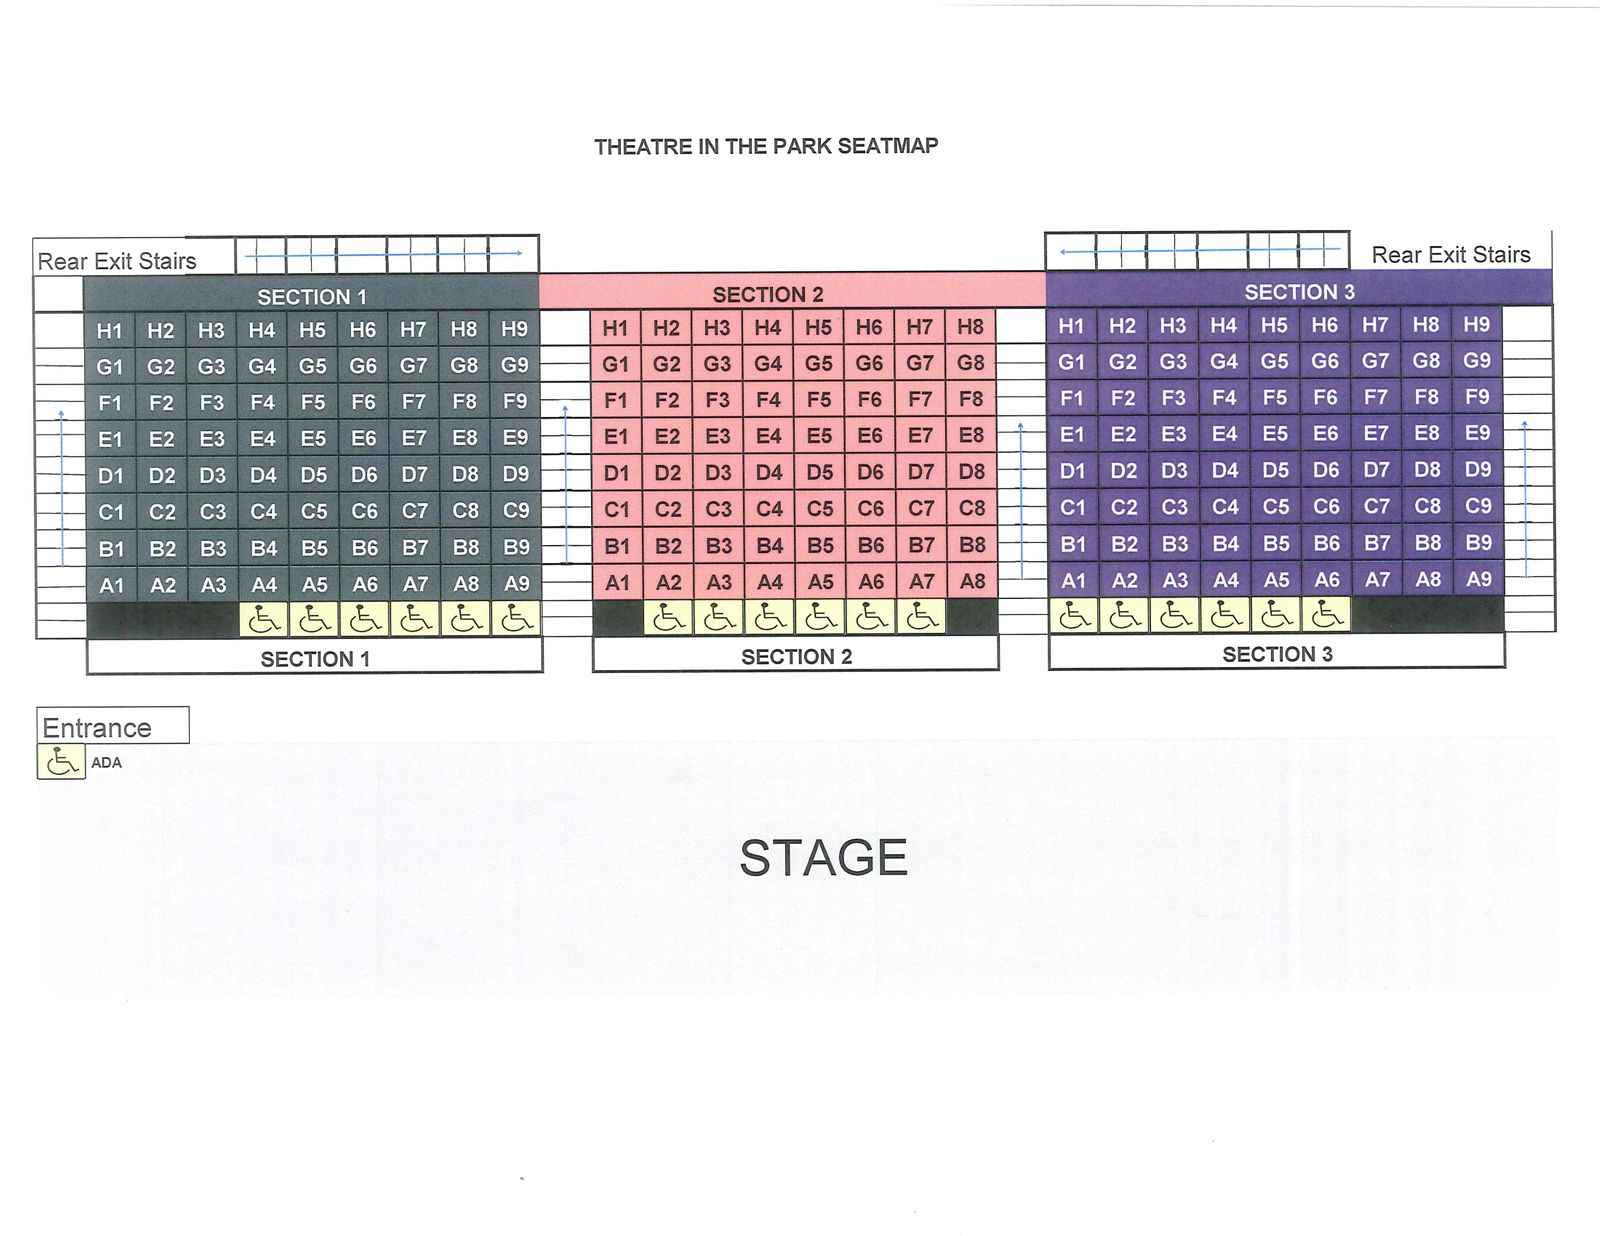 Theatre In The Park Visit Guided Tour and Seat Map